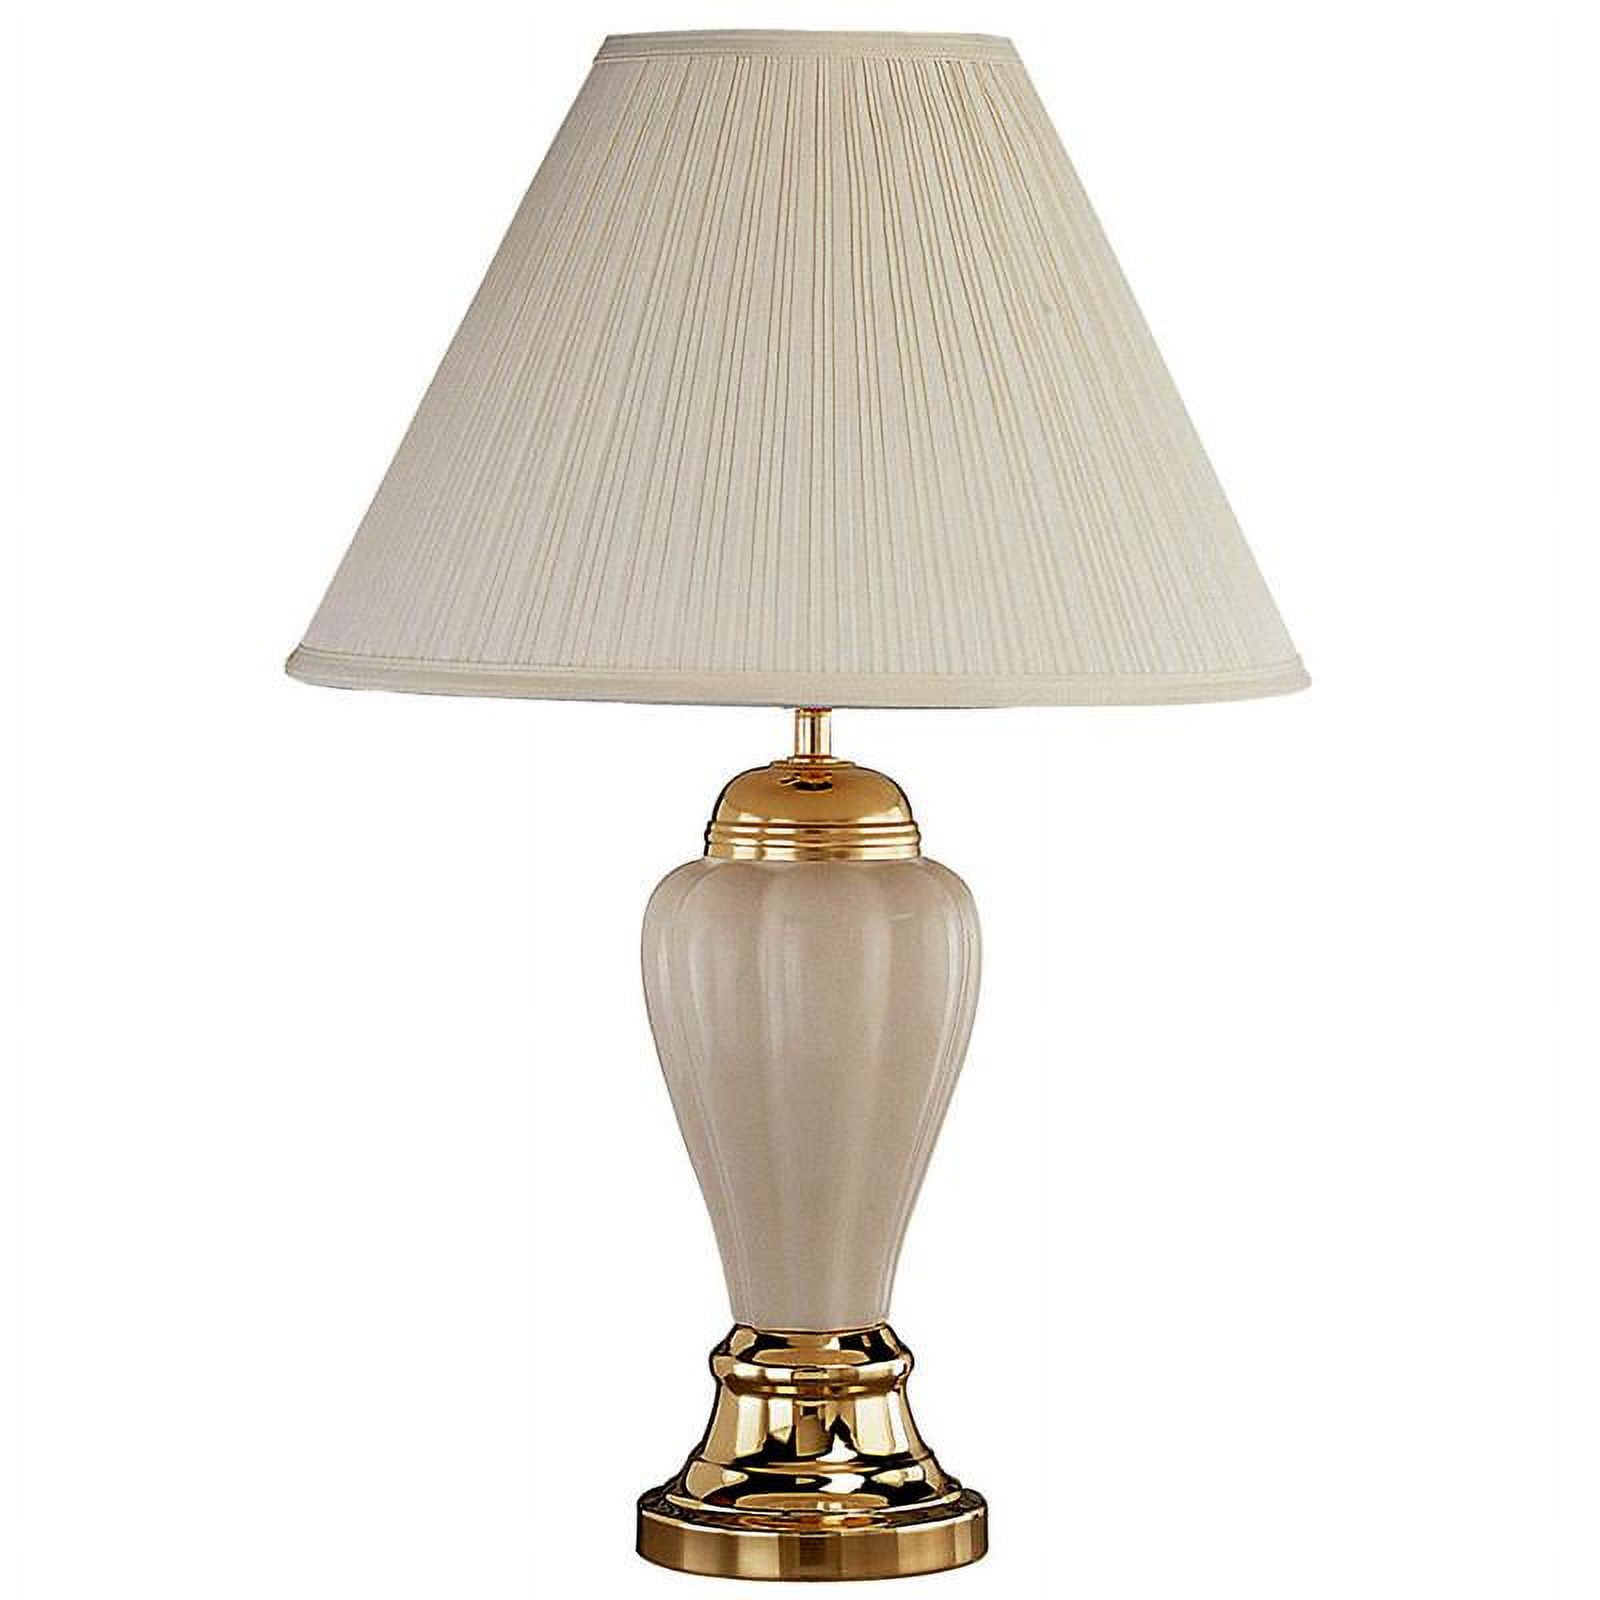 ORE International 27" Urn-Shaped Ceramic Table Lamp with Linen Shade in Ivory - image 2 of 2